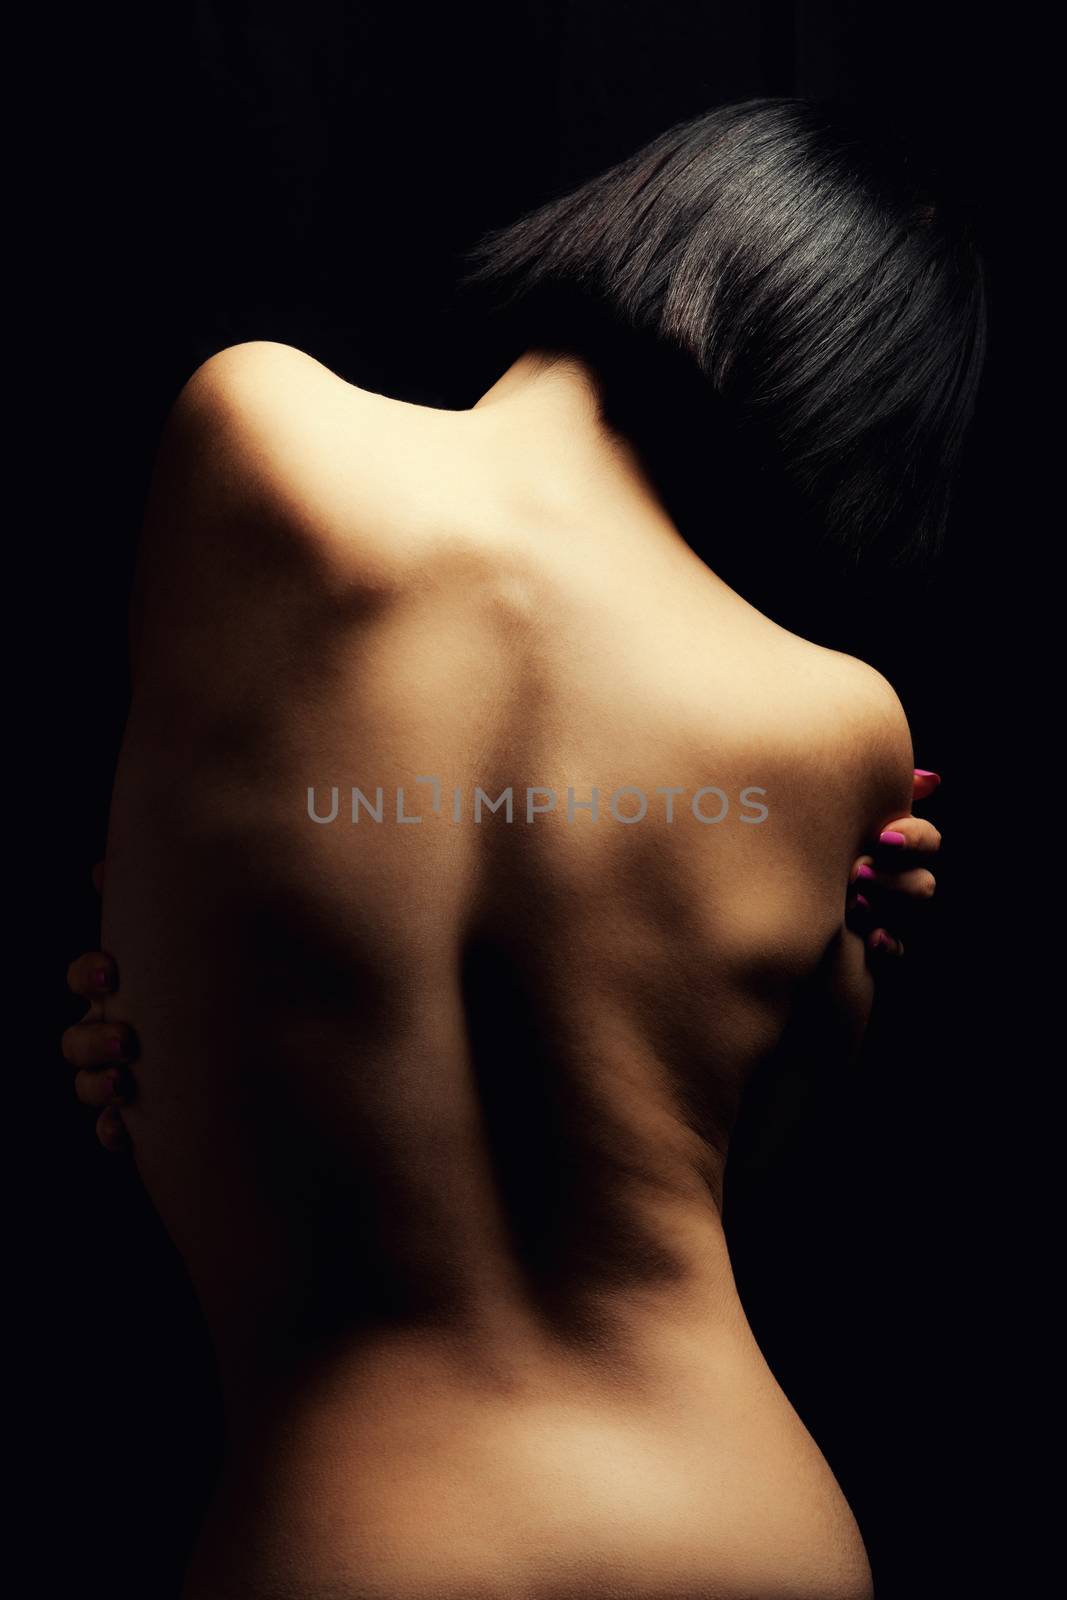 Back of woman. Portrait of the naked back of a young woman. Bobbed hair. Light striking. Smooth skin. Black background.